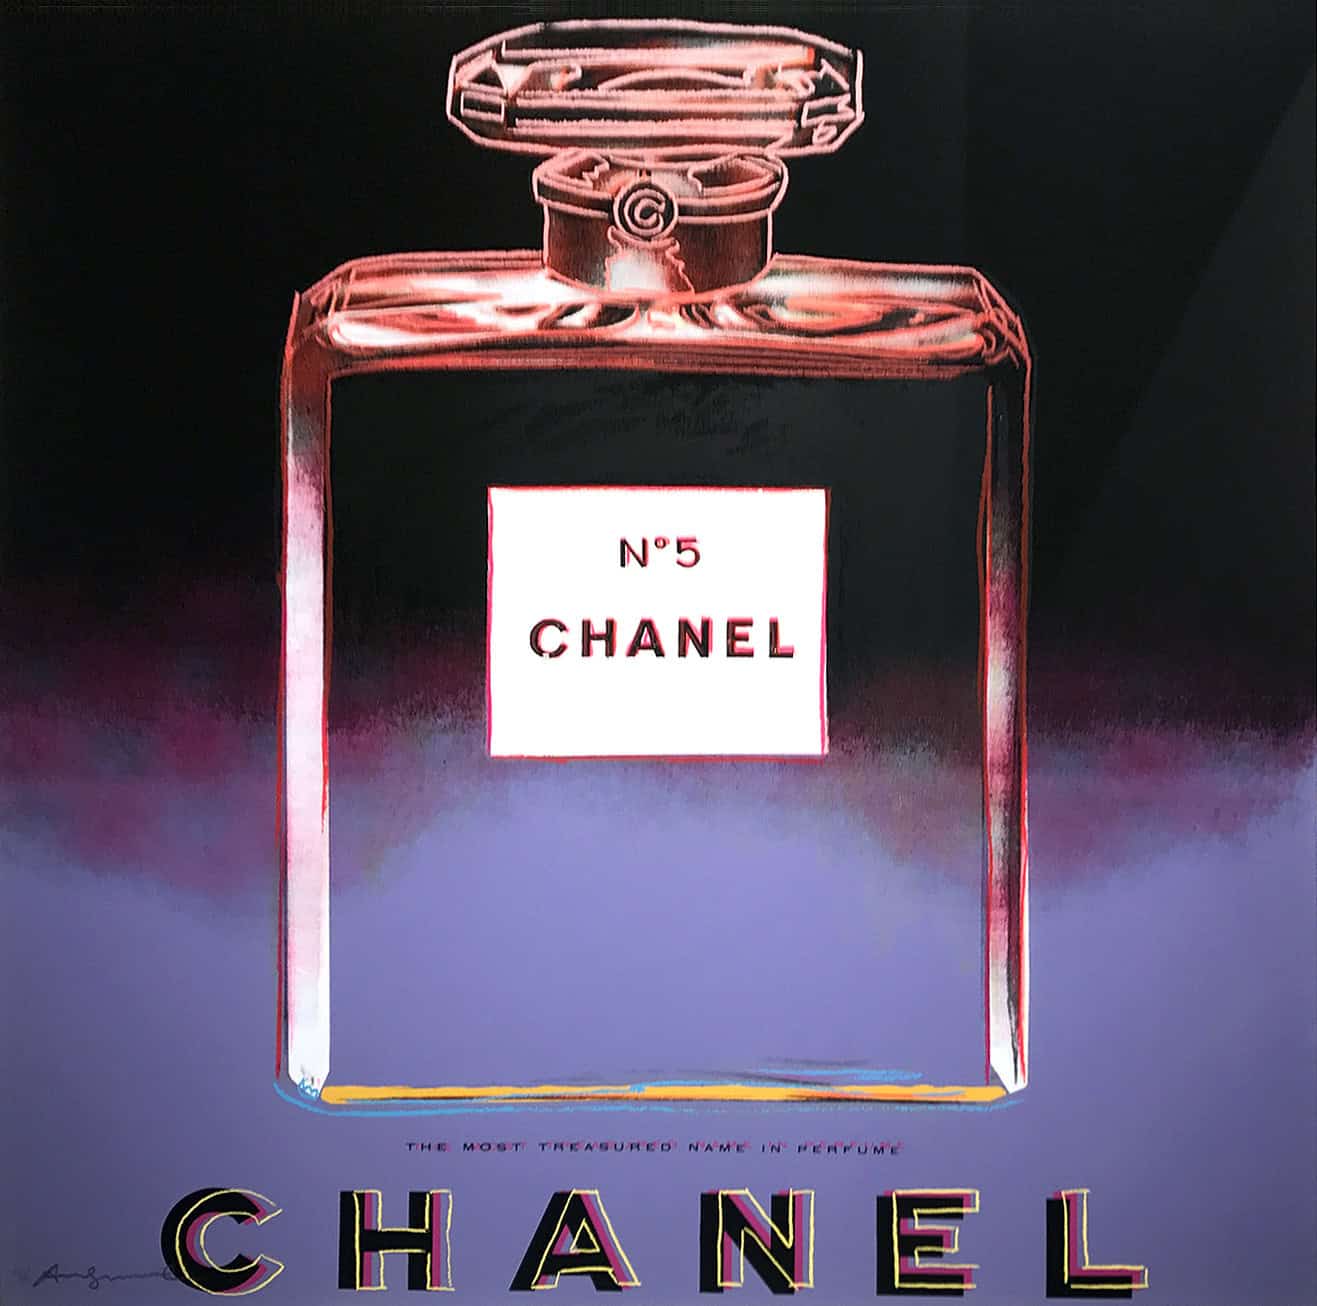 Andy Warhol, Chanel No. 5 from Ads Series 1985, Screen Print (S)